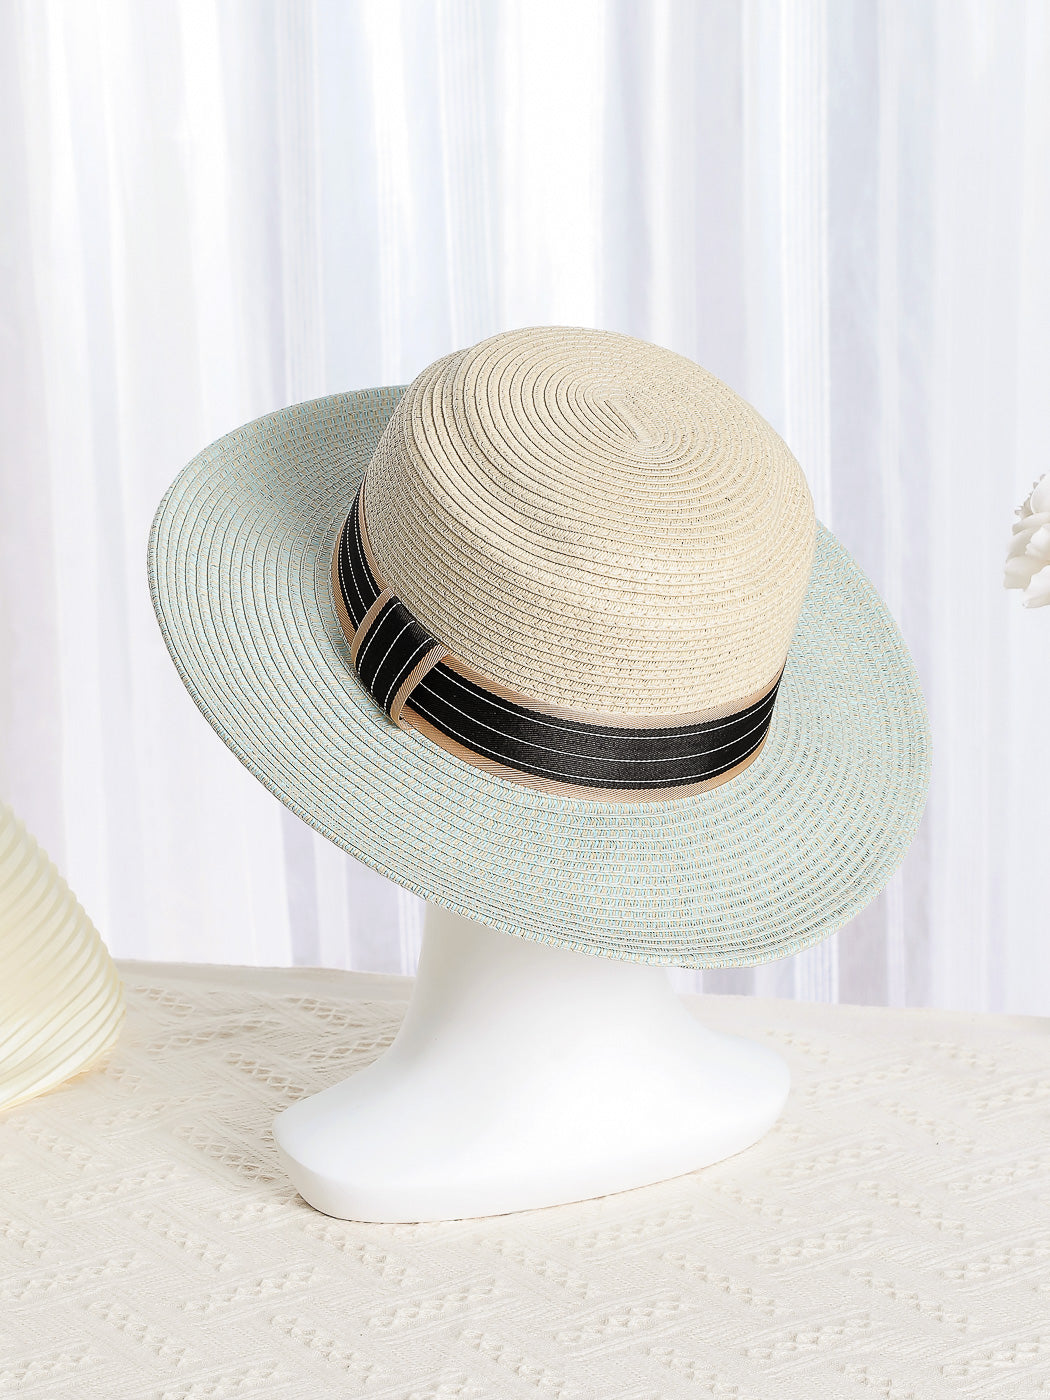 MINISO BRITISH STYLE BICOLOR STRAW HAT WITH FLAT TOP ( BLUE ) 2010116812105 FASHIONABLE HAT